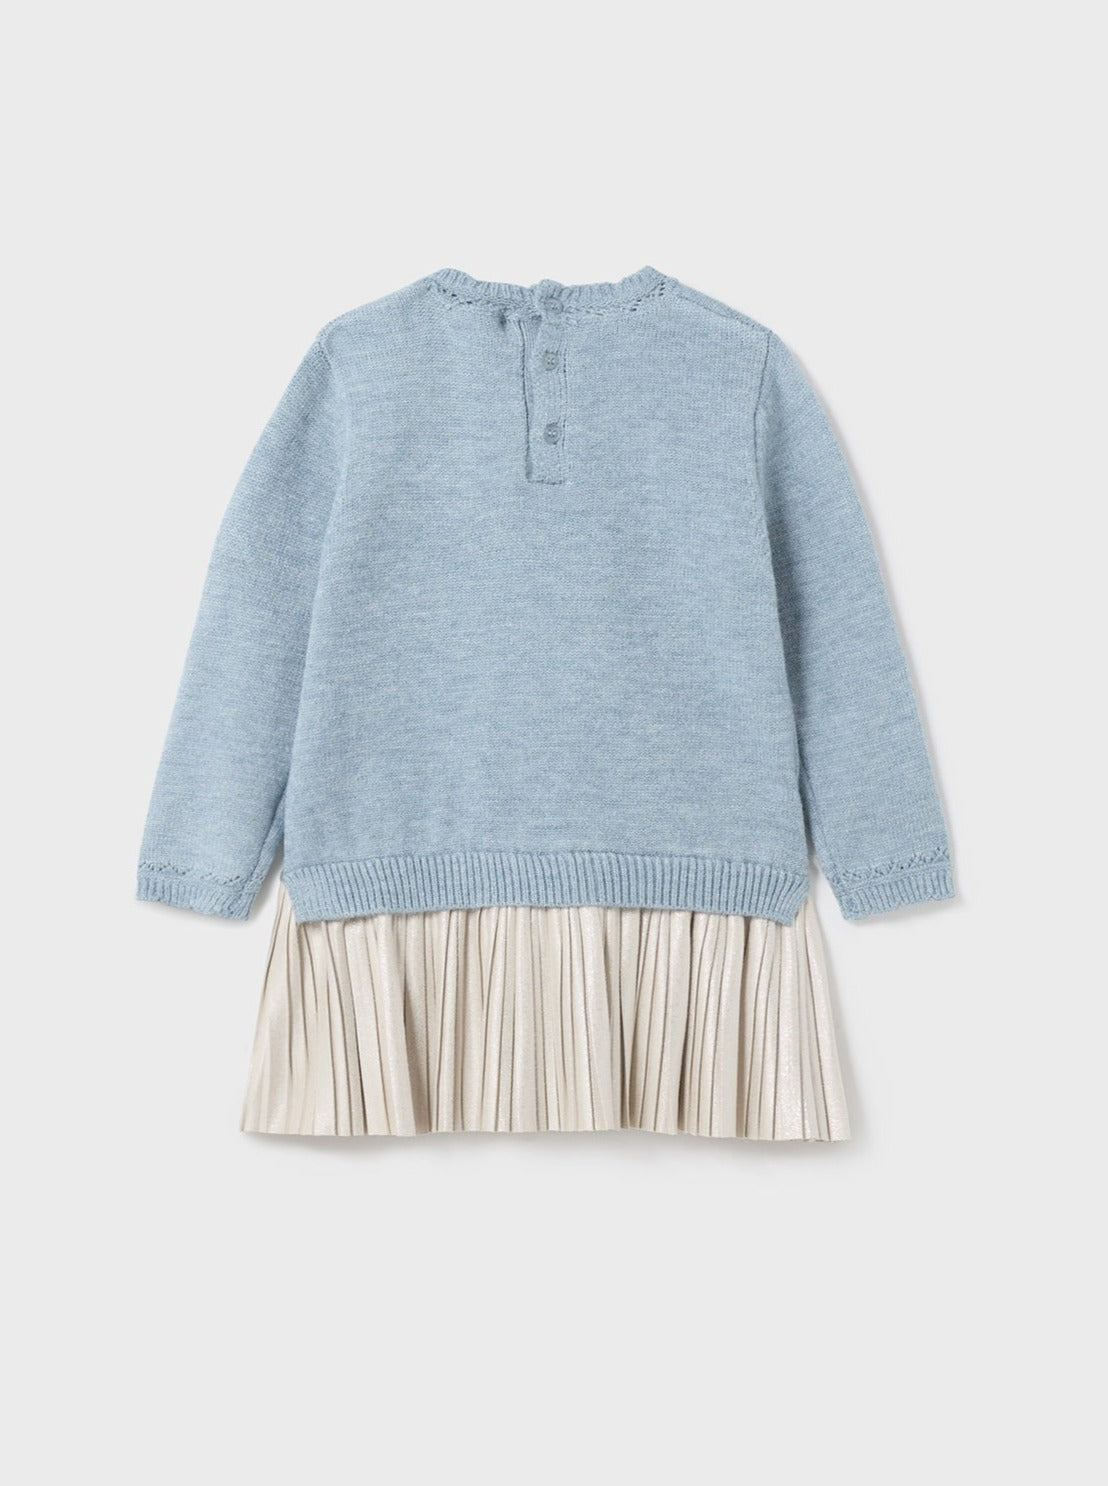 Mayoral Baby Blue Swan Pleated Knit Dress _2975-42